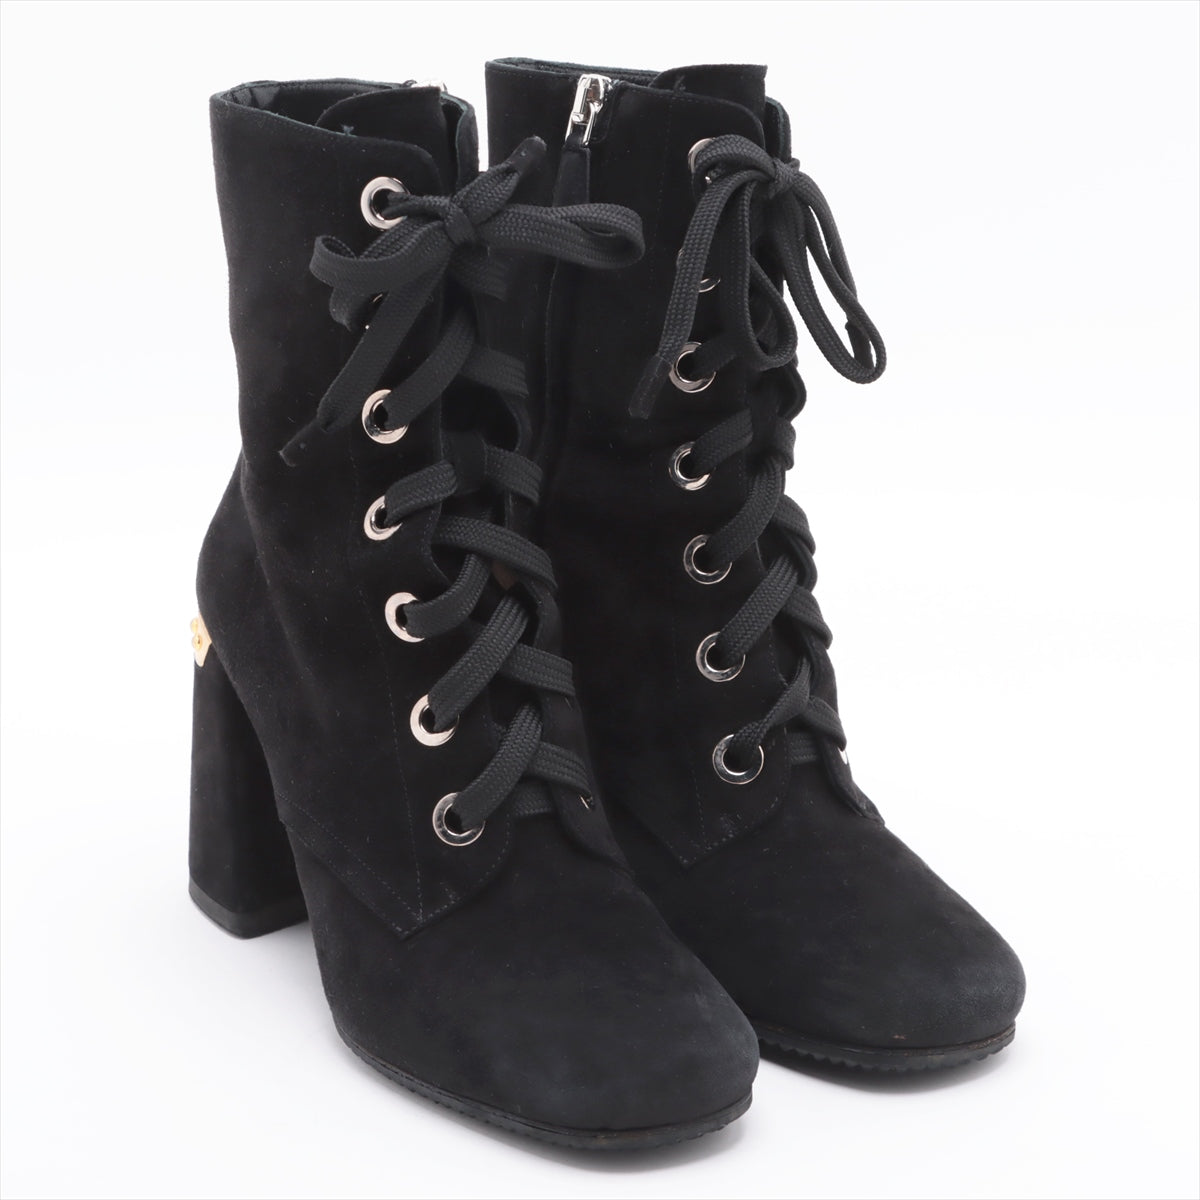 Prada Suede Boots 35 1/2 Ladies' Black Replacement Laces Included Lift repair